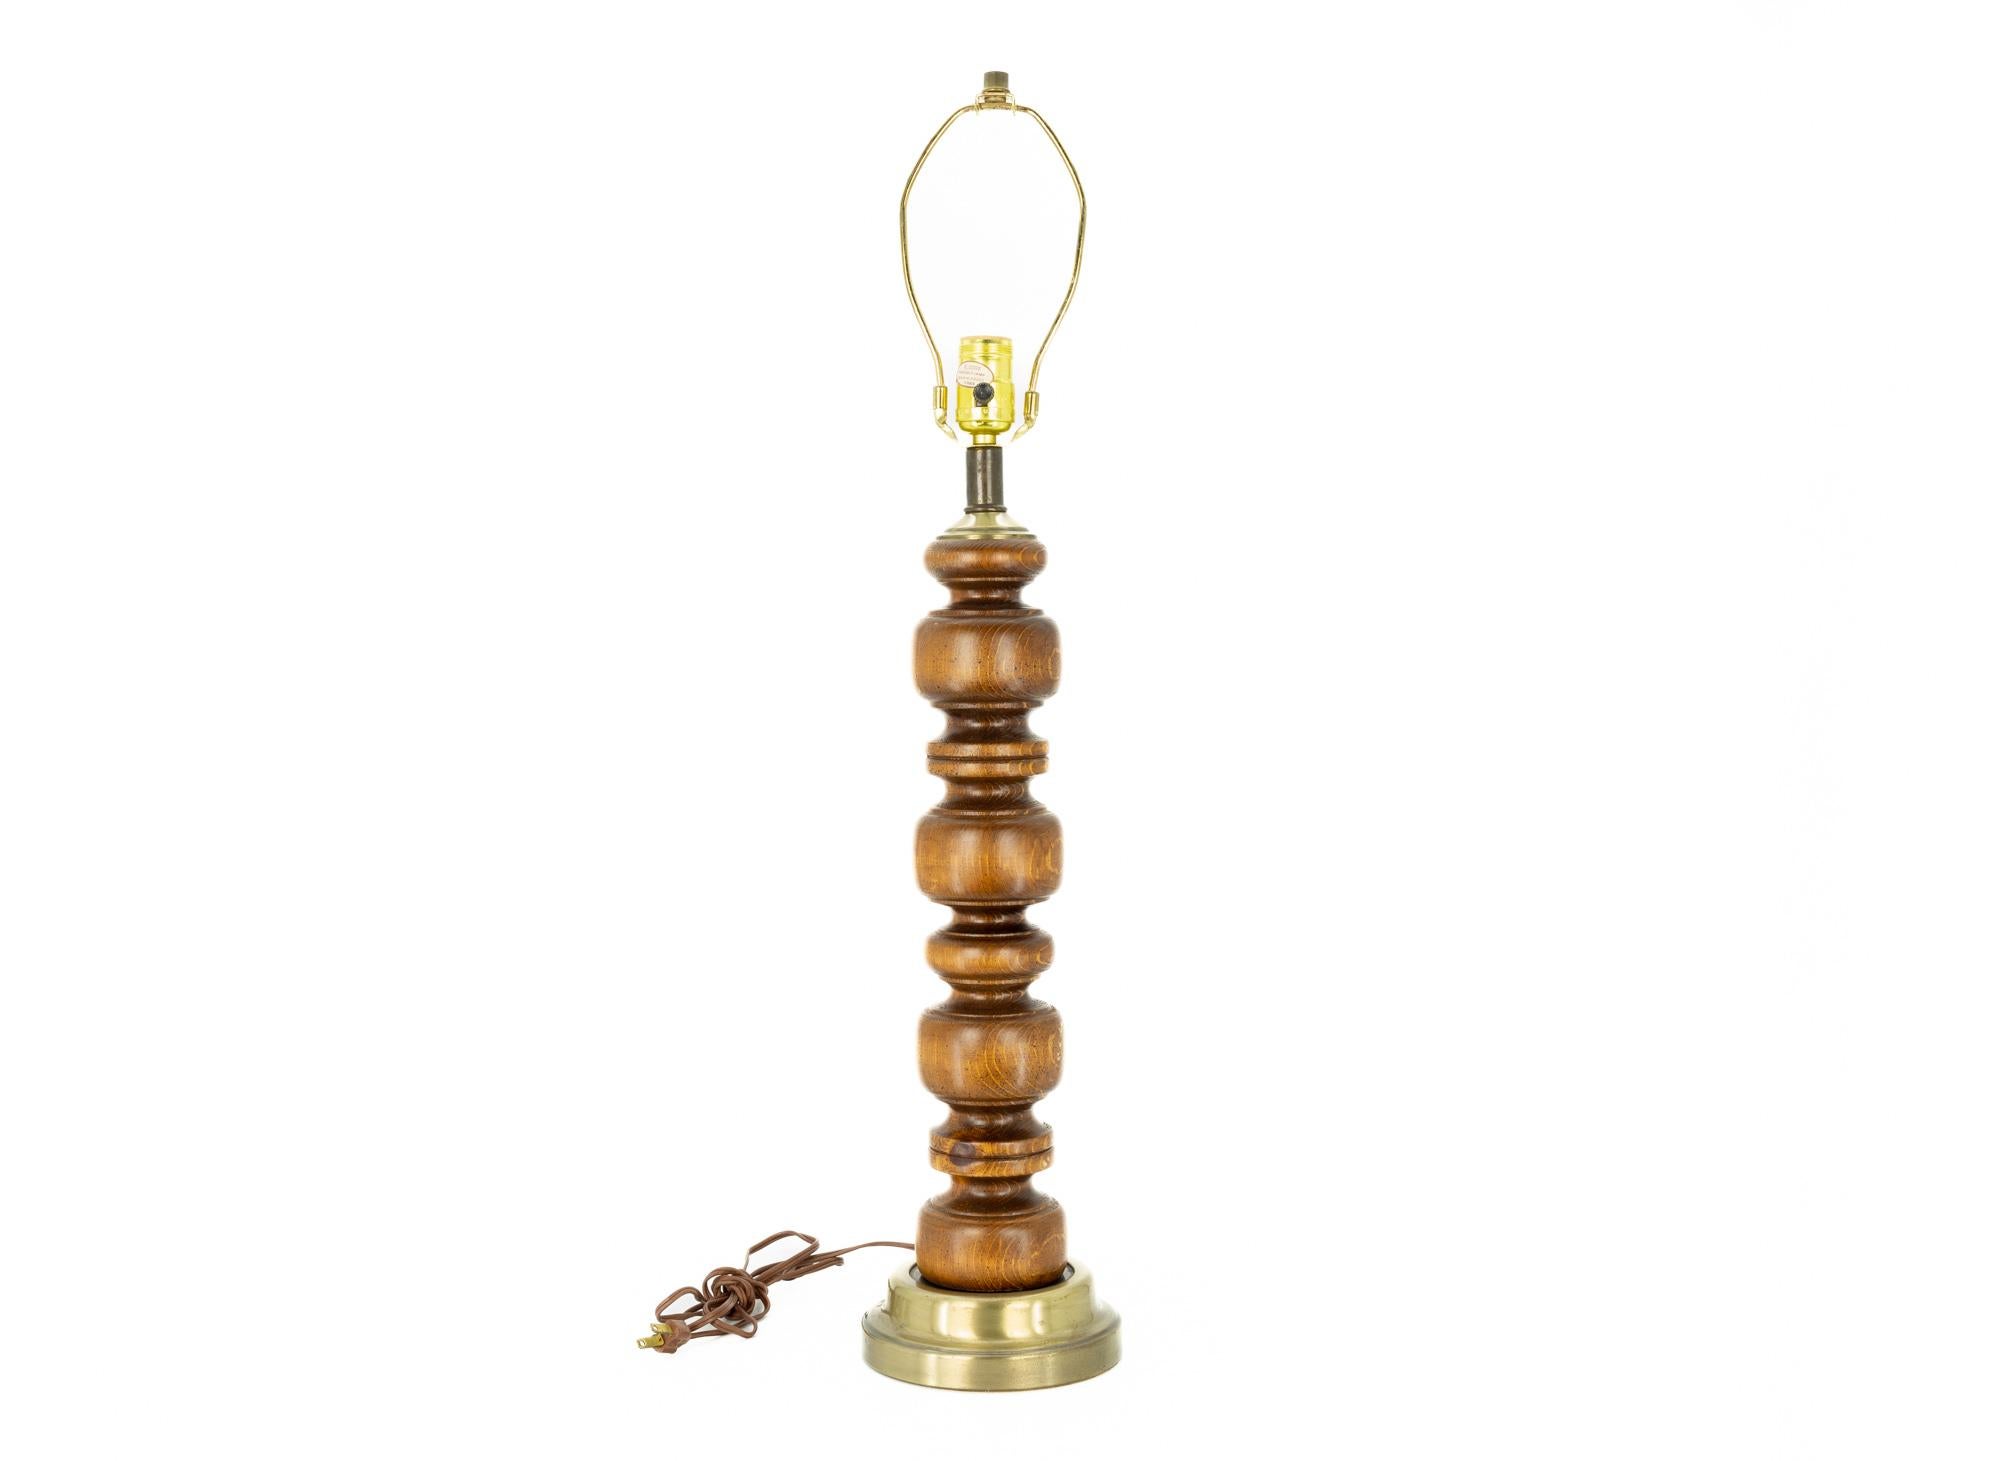 Mid Century Sculpted Walnut and Brass Lamp

This lamp measures: 6 wide x 6 deep x 29.5 inches high

Excellent Vintage Condition

We take our photos in a controlled lighting studio to show as much detail as possible. We do not photoshop out